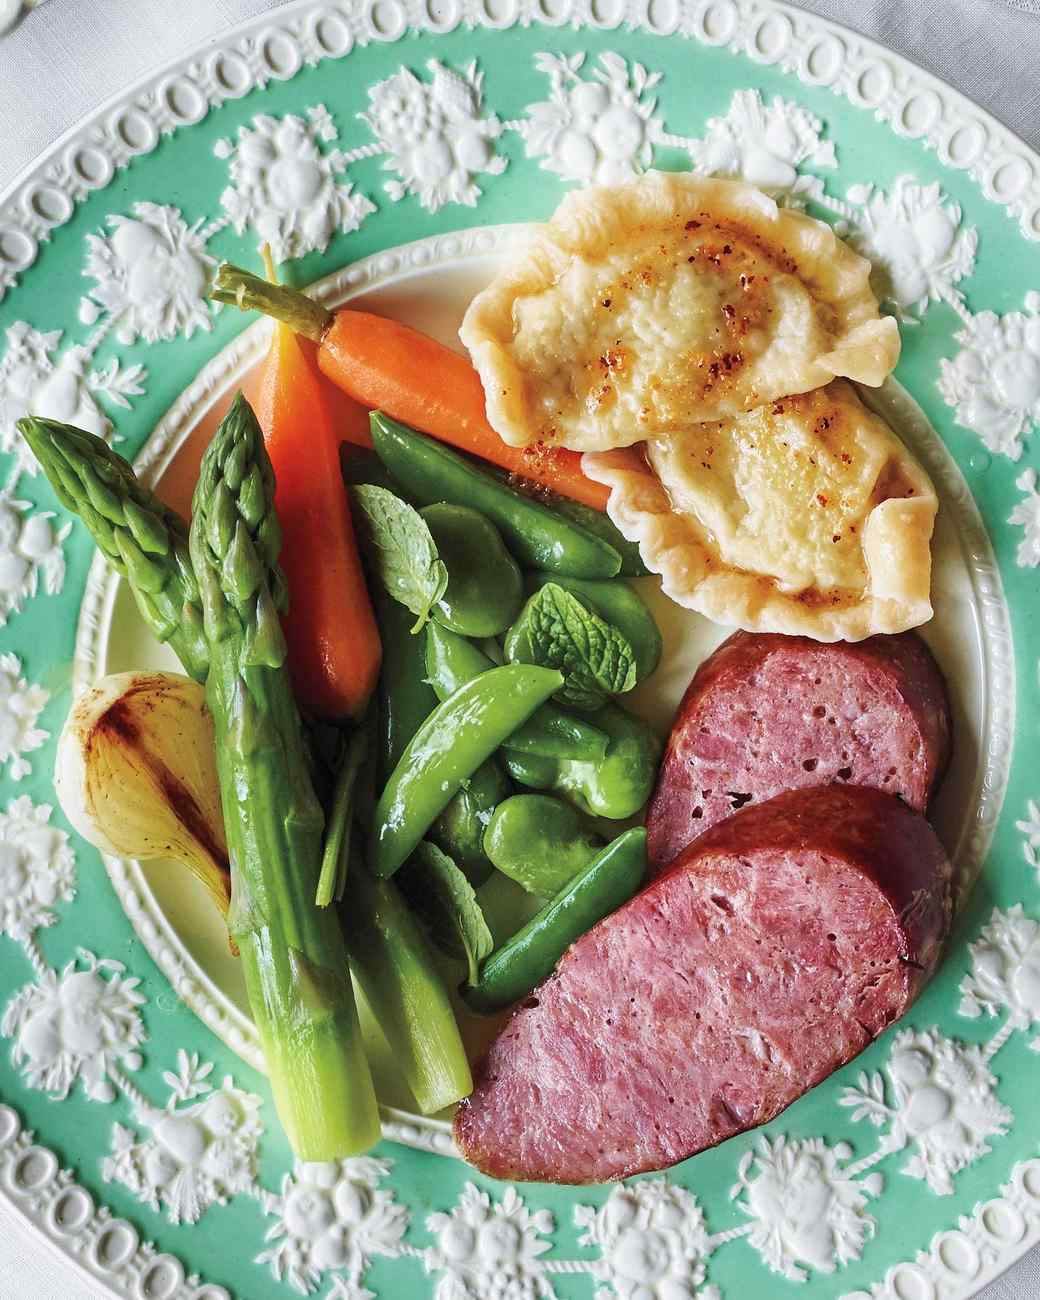 Martha Stewart Easter Dinner Menu
 Get Inspired by Martha s Russian Themed Easter Menu and